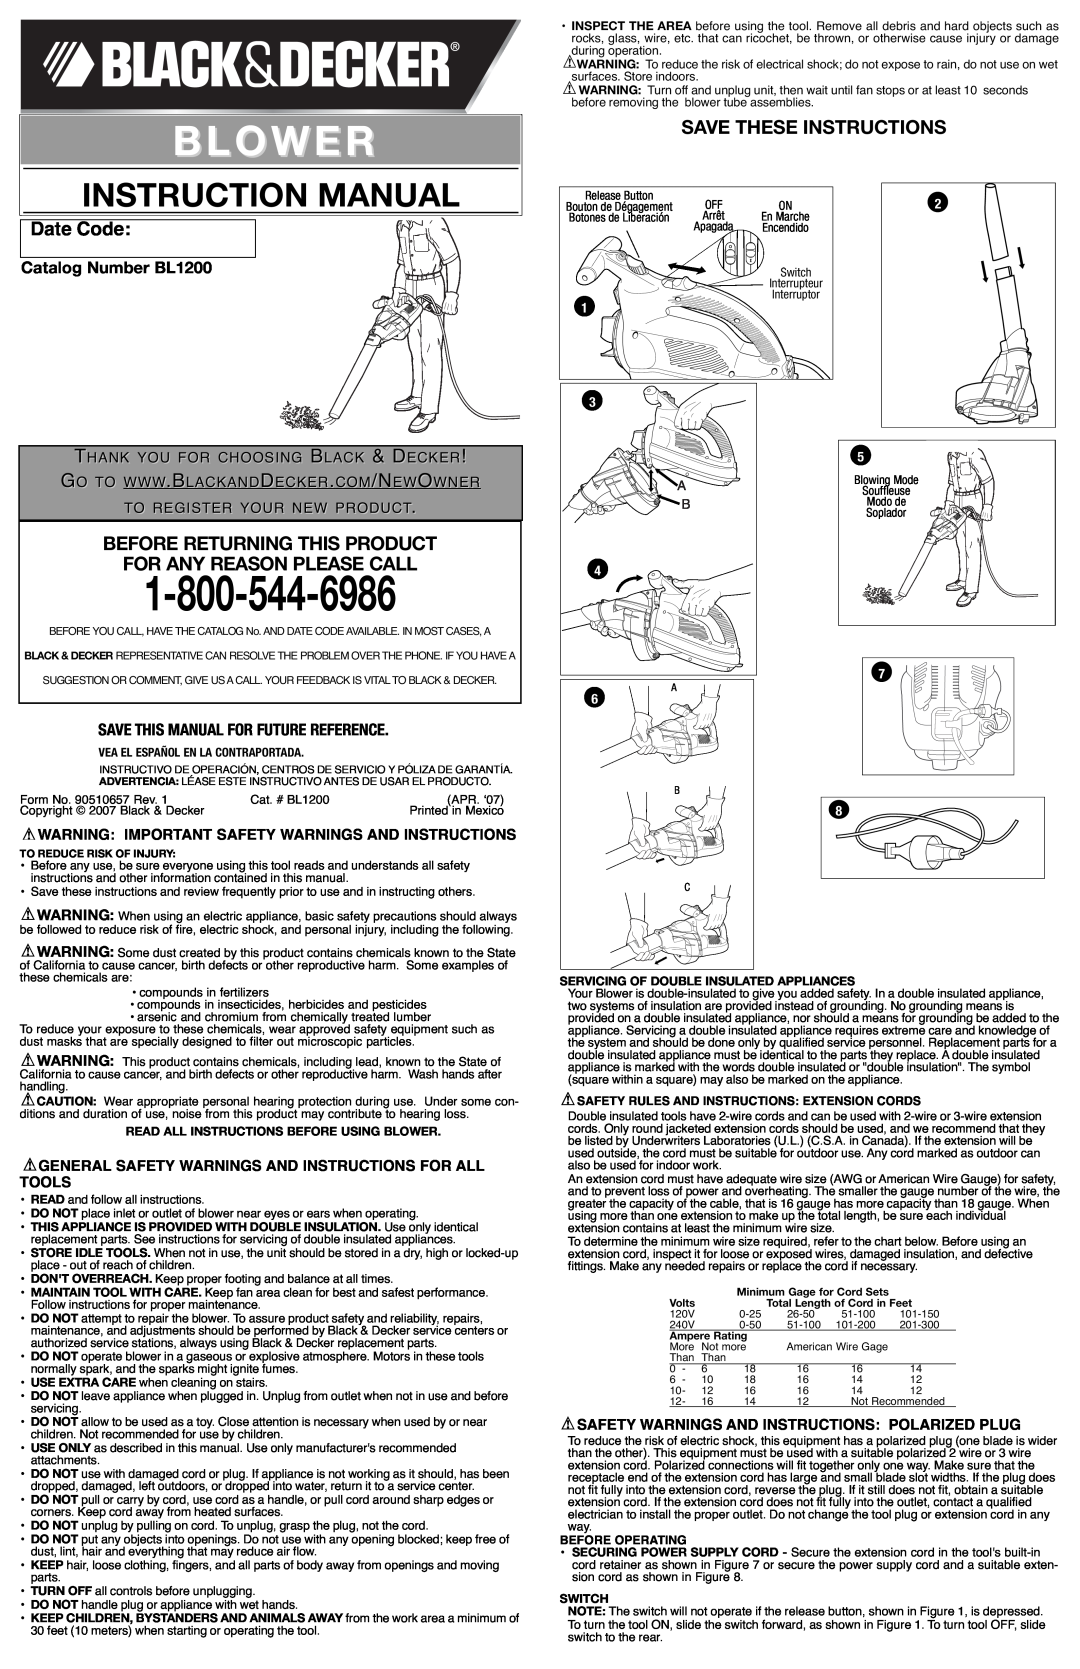 Black & Decker 90510657 instruction manual Blower, Save These Instructions, Catalog Number BL1200, Date Code 